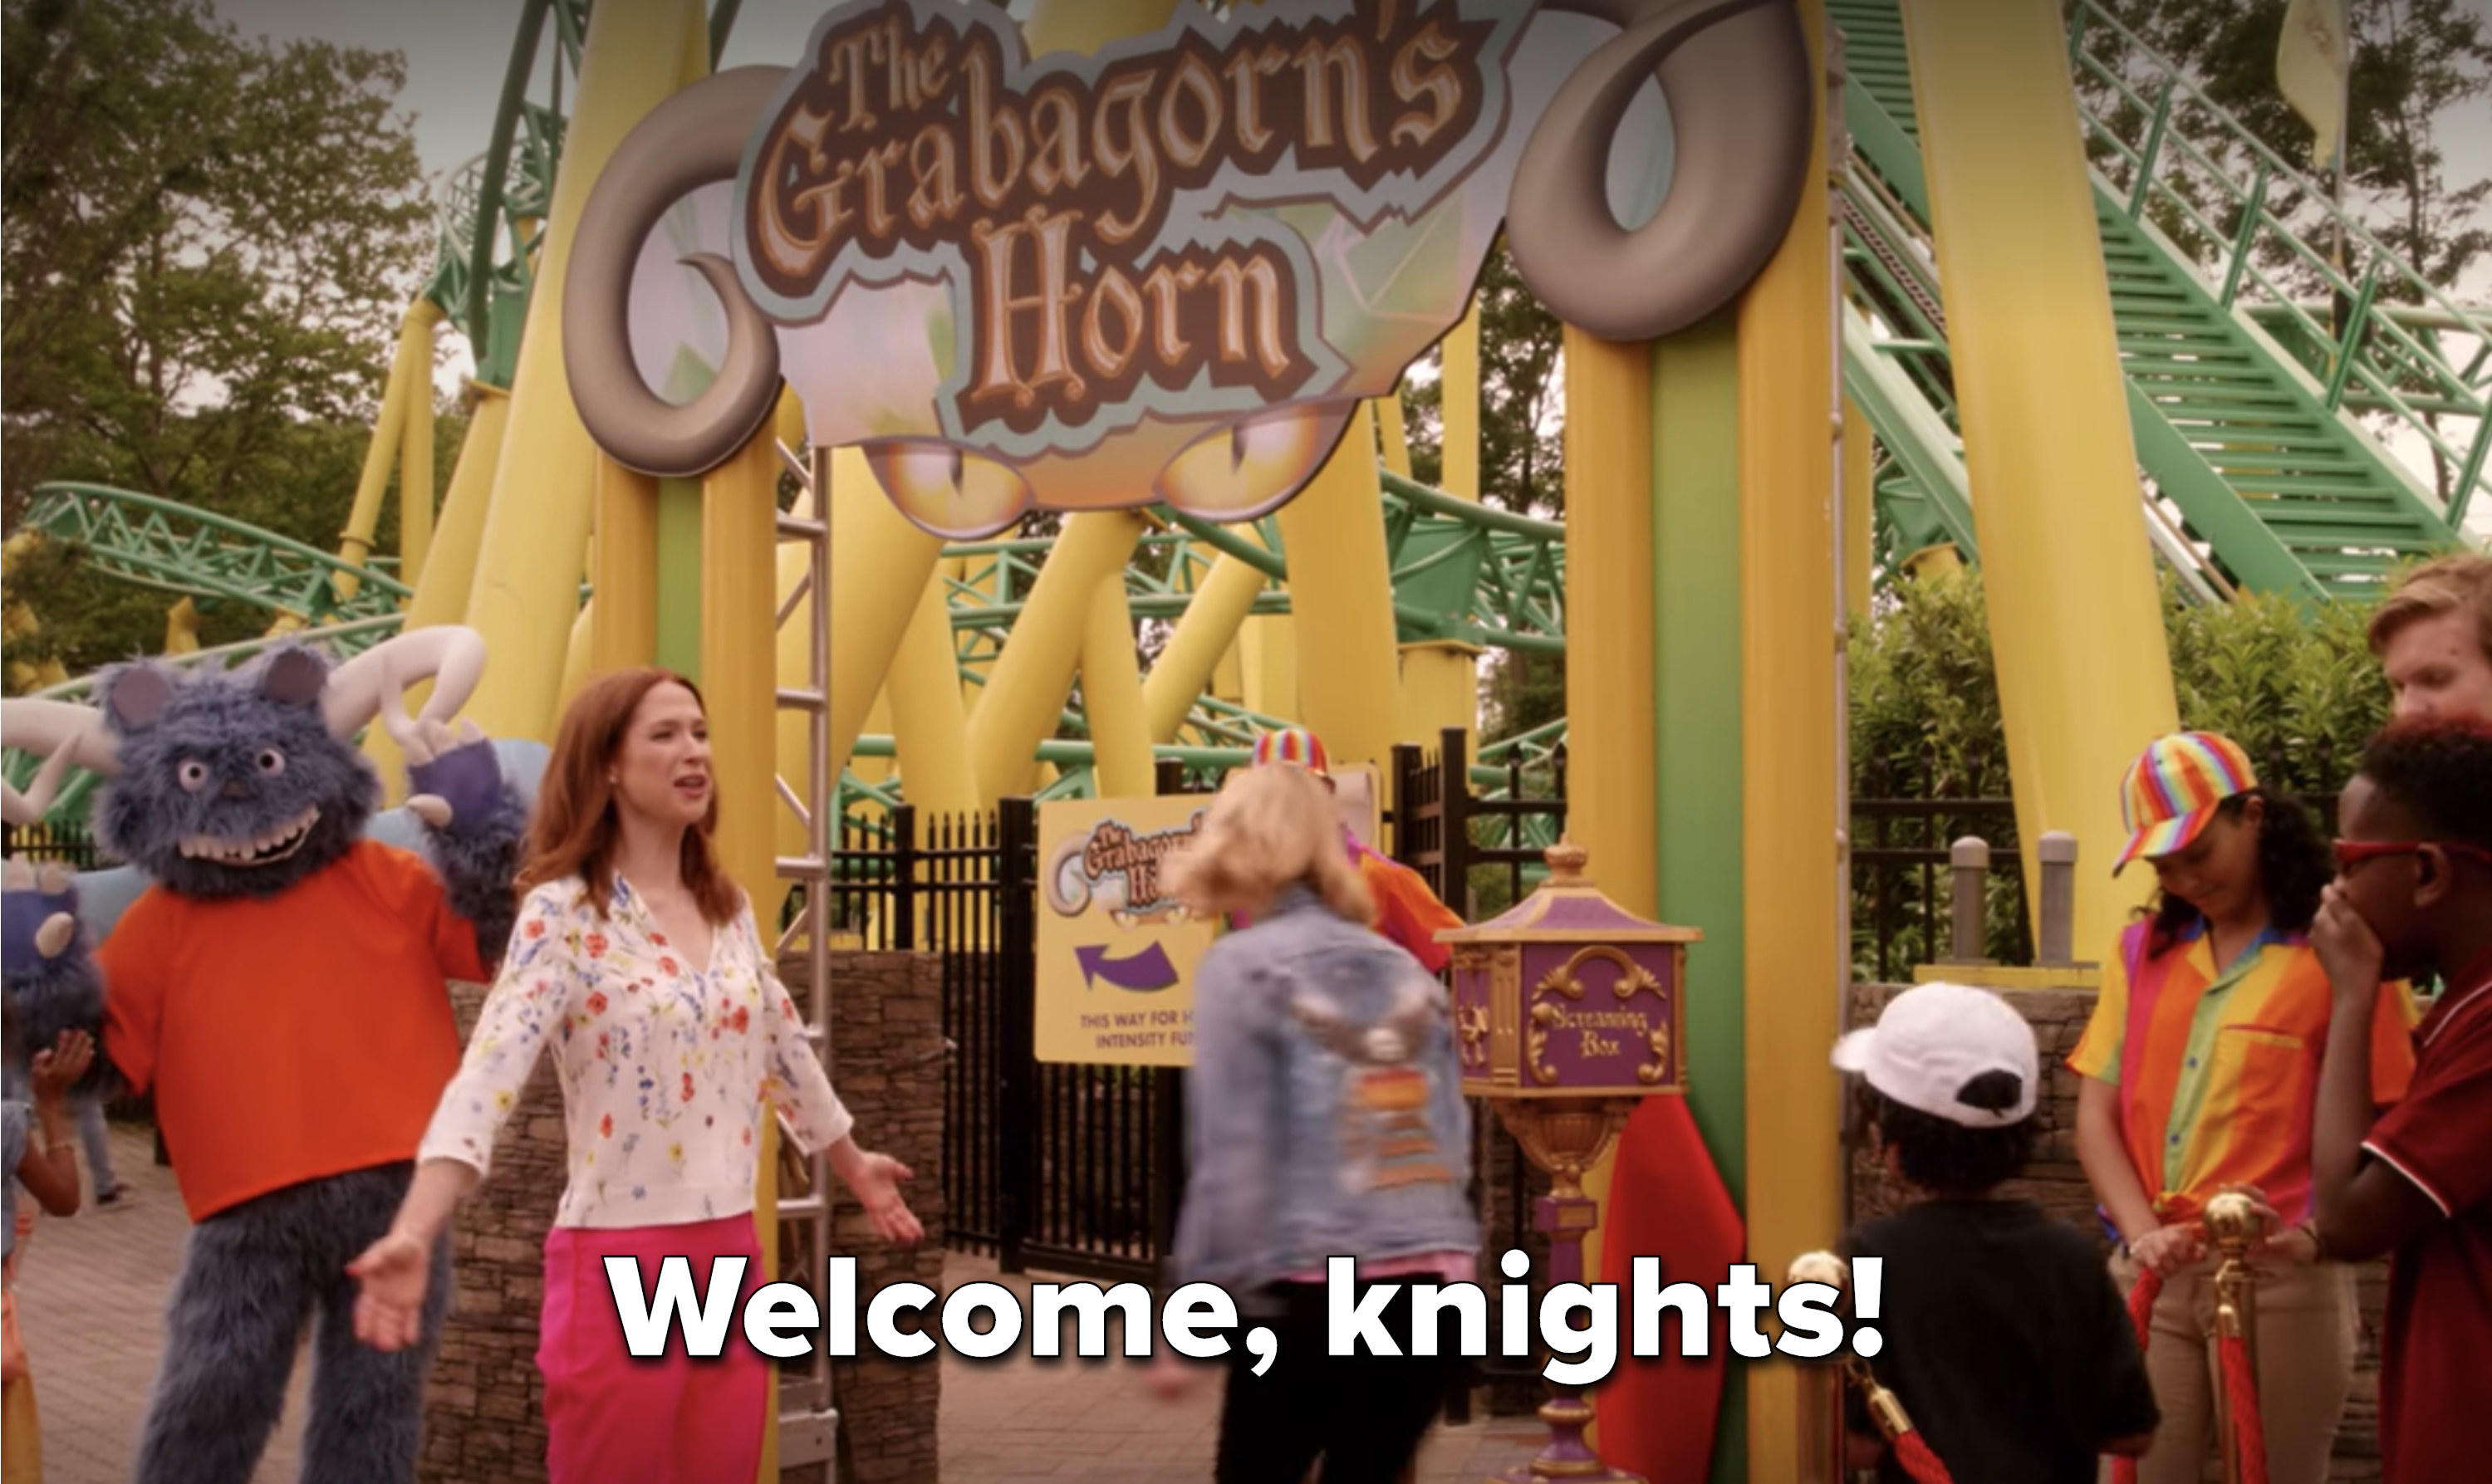 at her theme park, Kimmy says &quot;Welcome, knights!&quot;